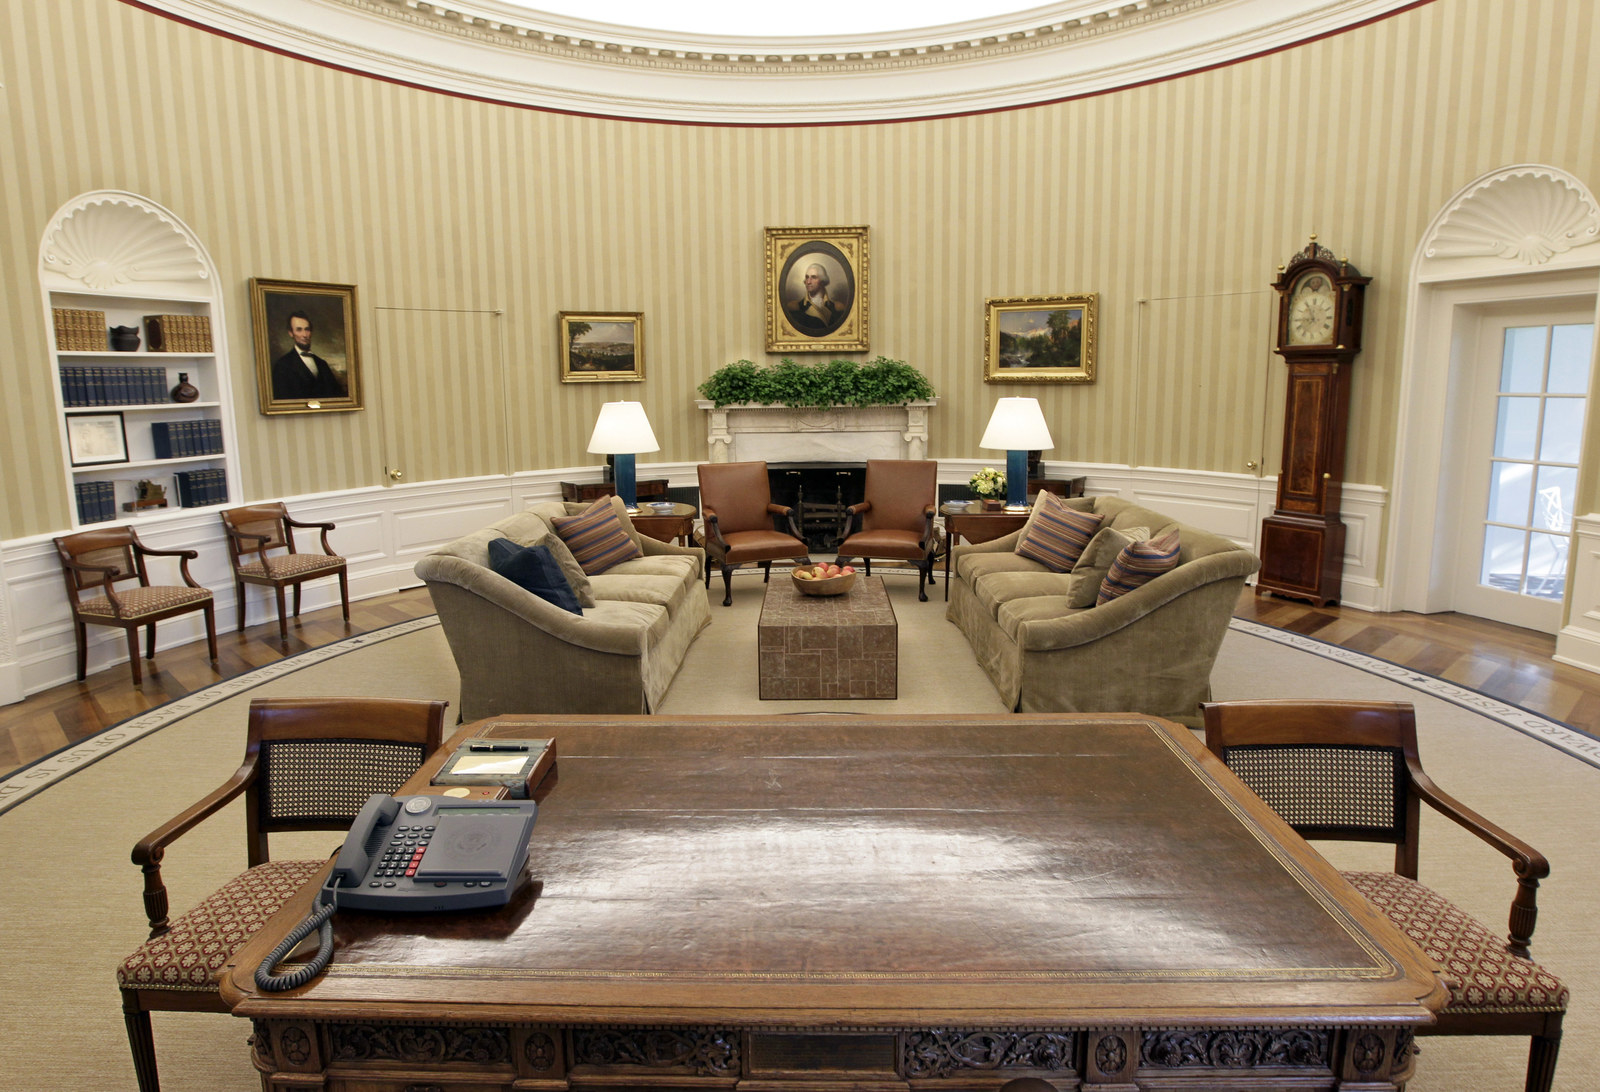 The Oval Office periodically undergoes changes to its carpet, couches, drap...